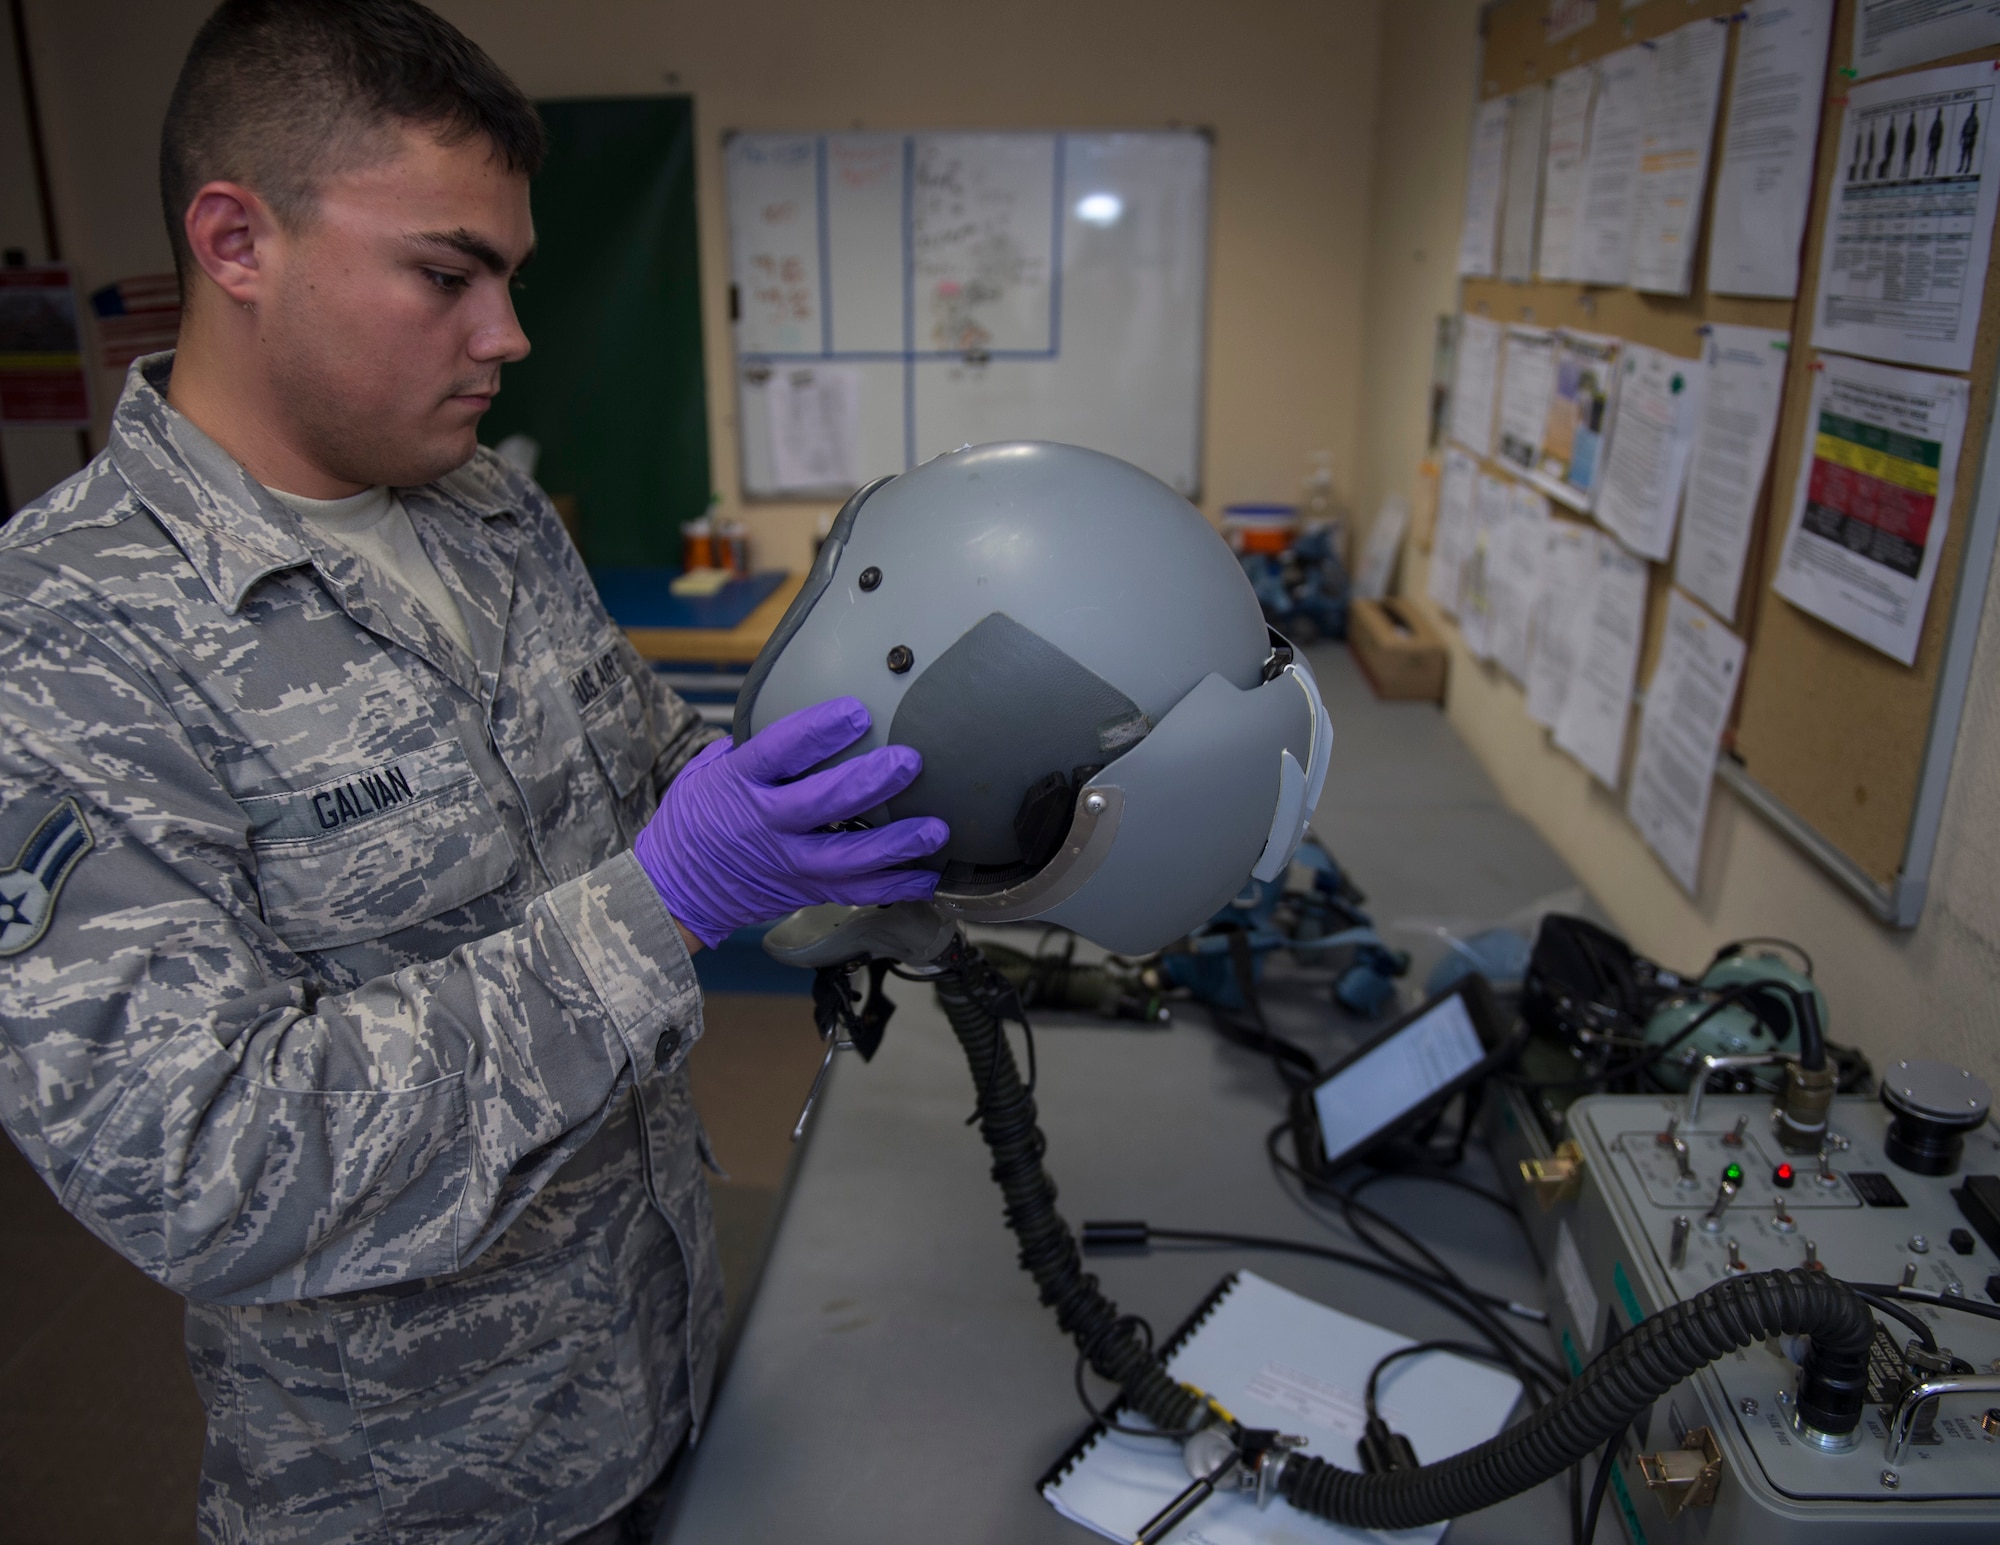 U.S. Air Force Airman 1st Class Dallas Galvan, an aircrew flight equipment technician with the 379th Expeditionary Operational Support Squadron, inspects a HGU-55/P helmet and MBU-20/P mask at Al Udeid Air Base, Qatar, May 16, 2017. Aircrew flight equipment technician’s work day and night to inspect, repair and modify helmets, combat survivor evader locators, Scott 358 Quick Don Oxygen Masks, and aircrew survival equipment kit to help keep aircrew members safe.  (U.S. Air Force photo by Tech. Sgt. Amy M. Lovgren)